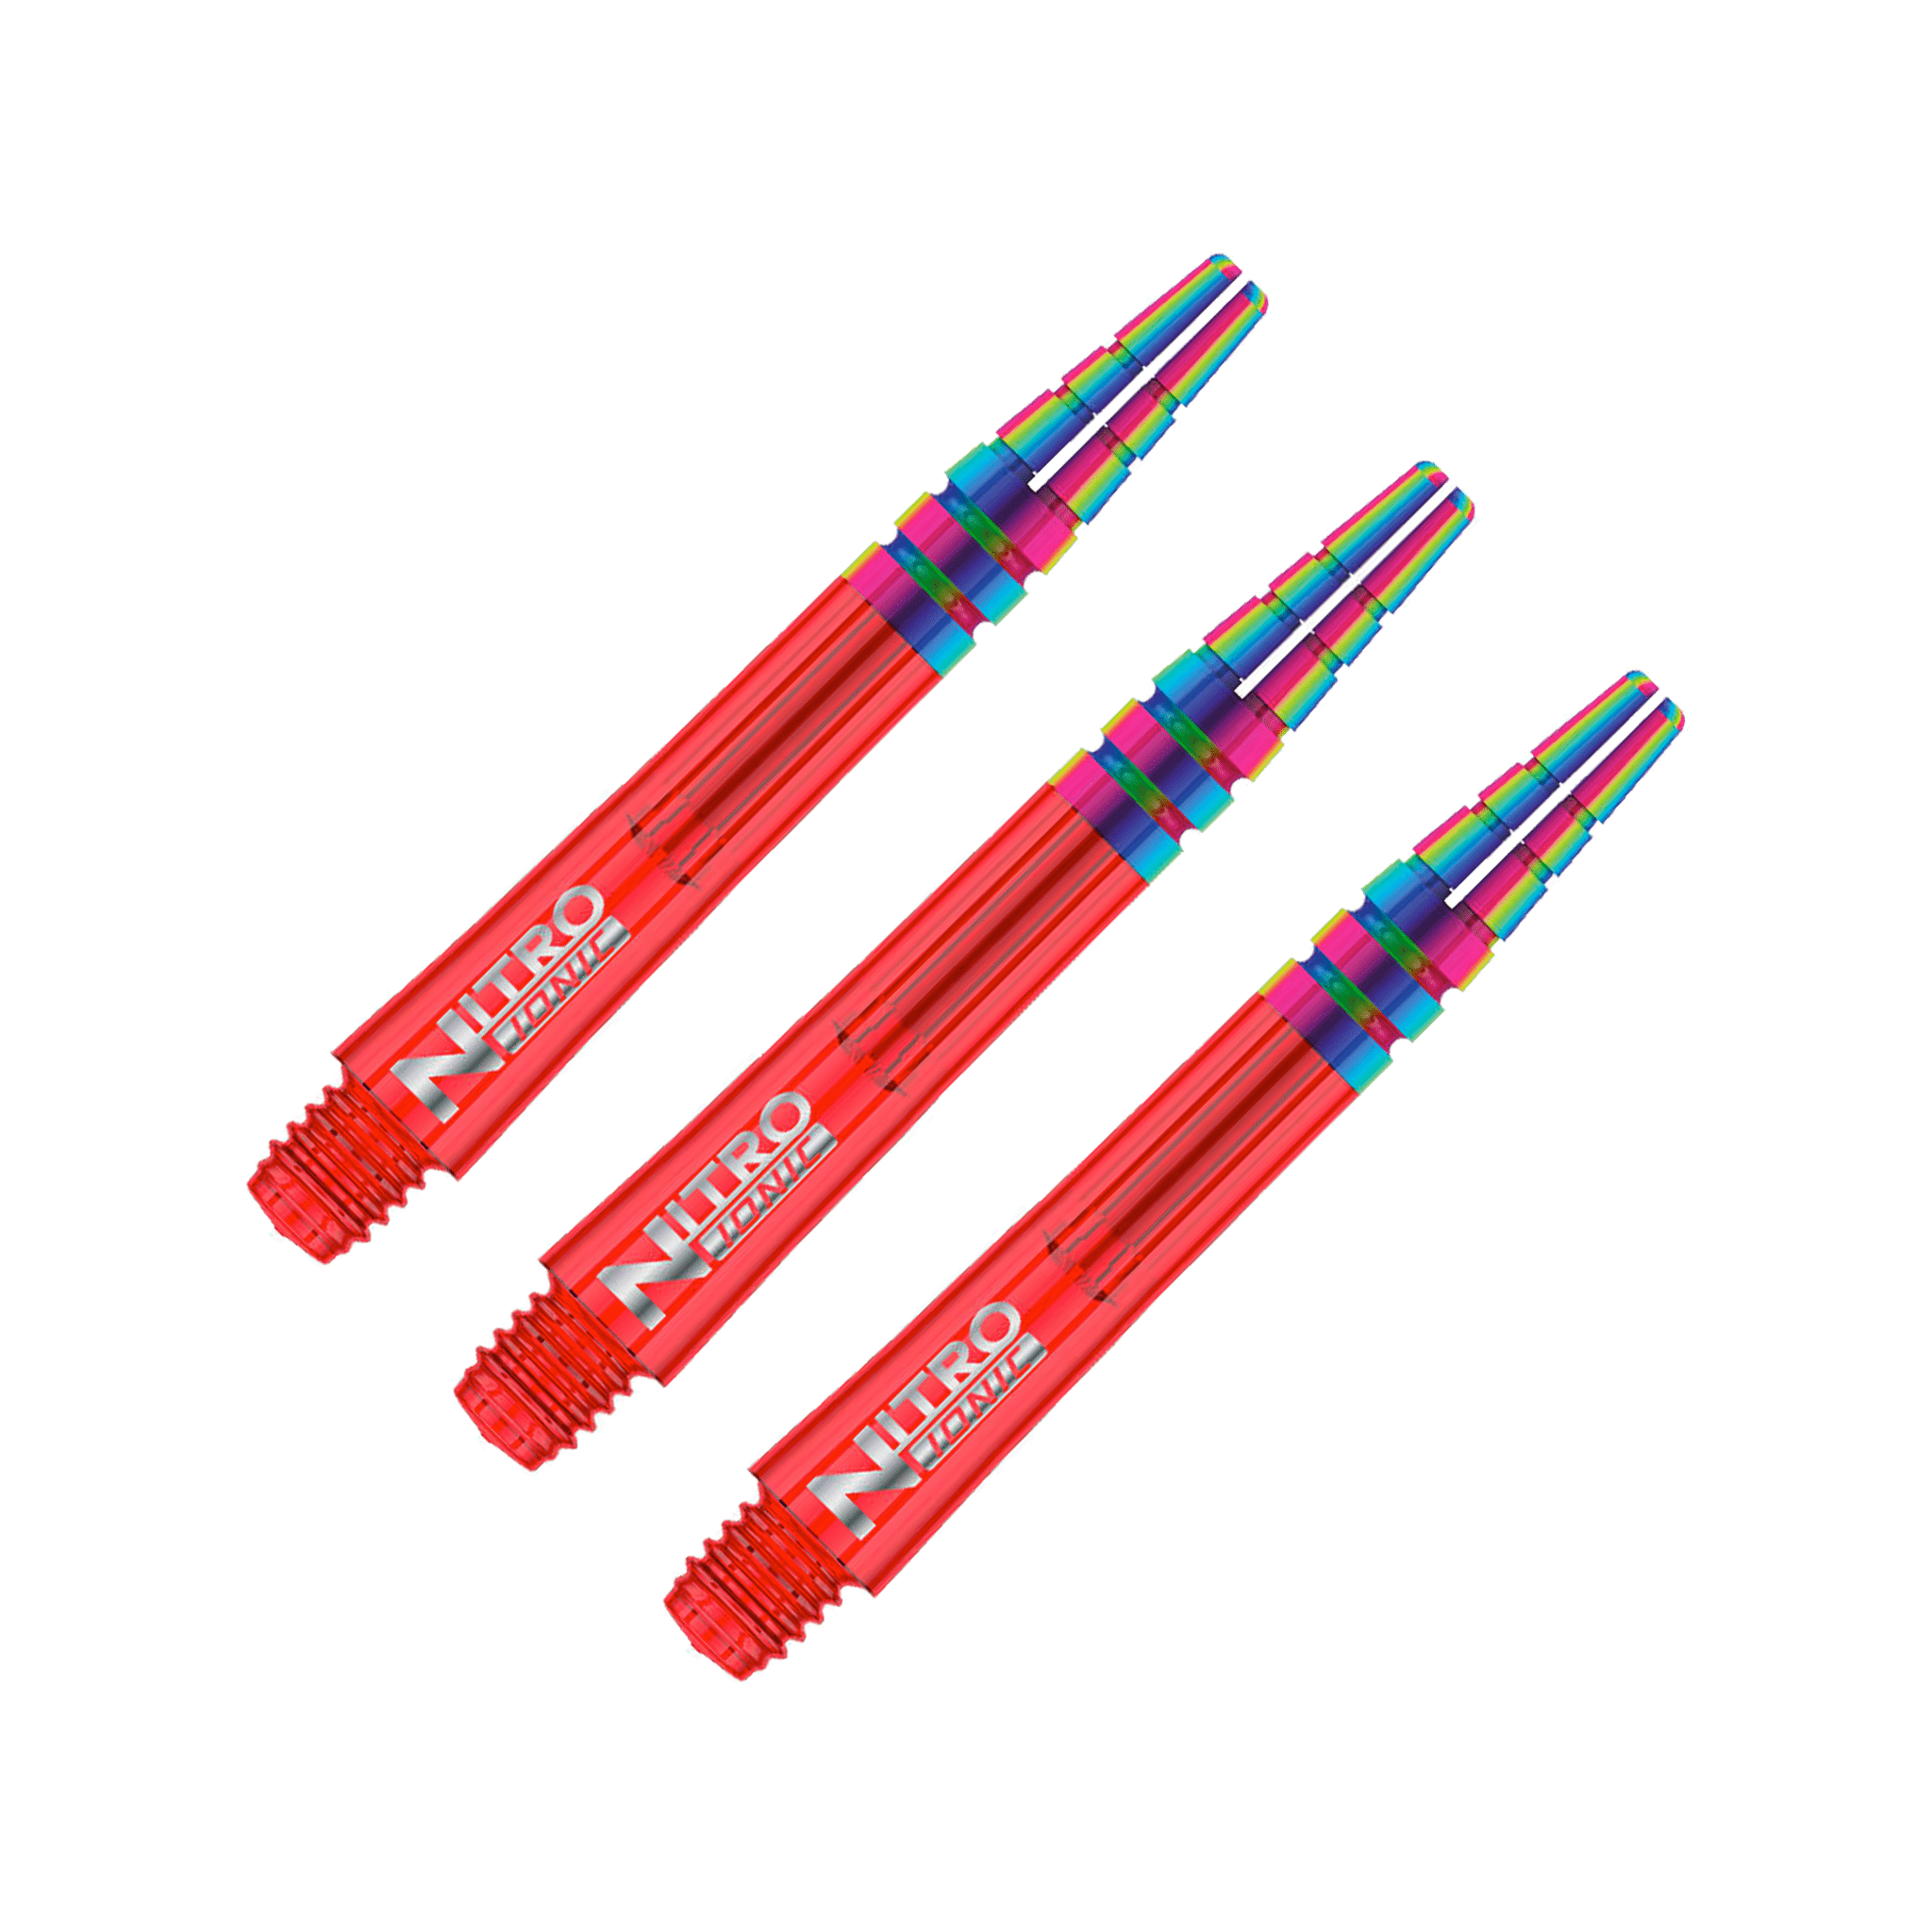 Red Dragon Nitrotech Ionic Short (36mm) Polycarbonate Dart Shafts Red Shafts